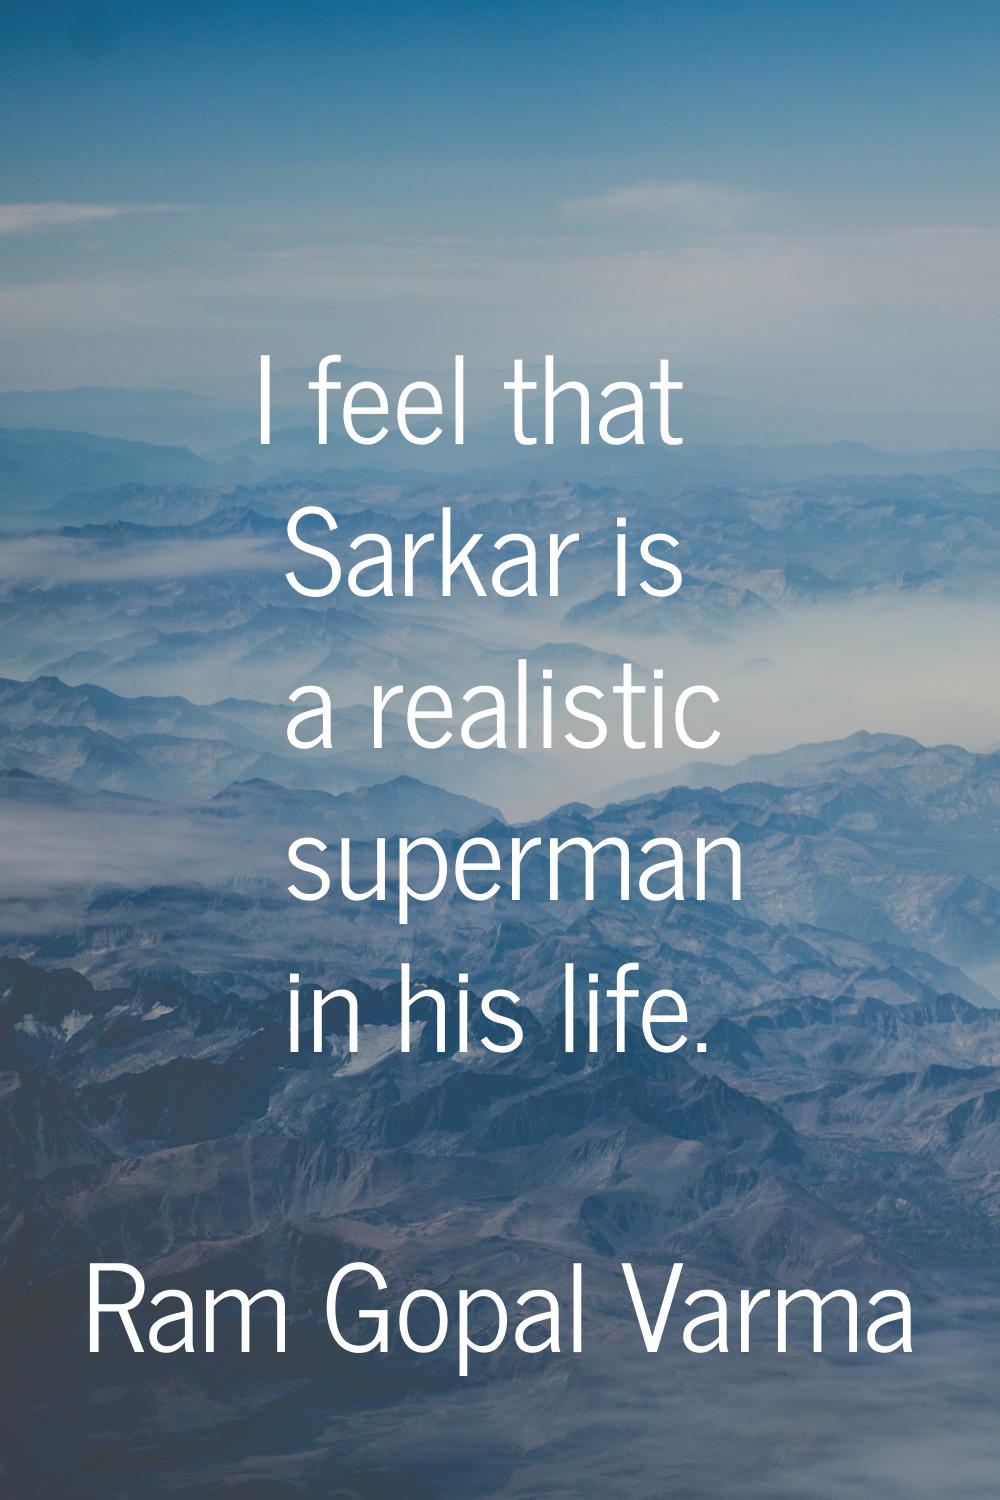 I feel that Sarkar is a realistic superman in his life.